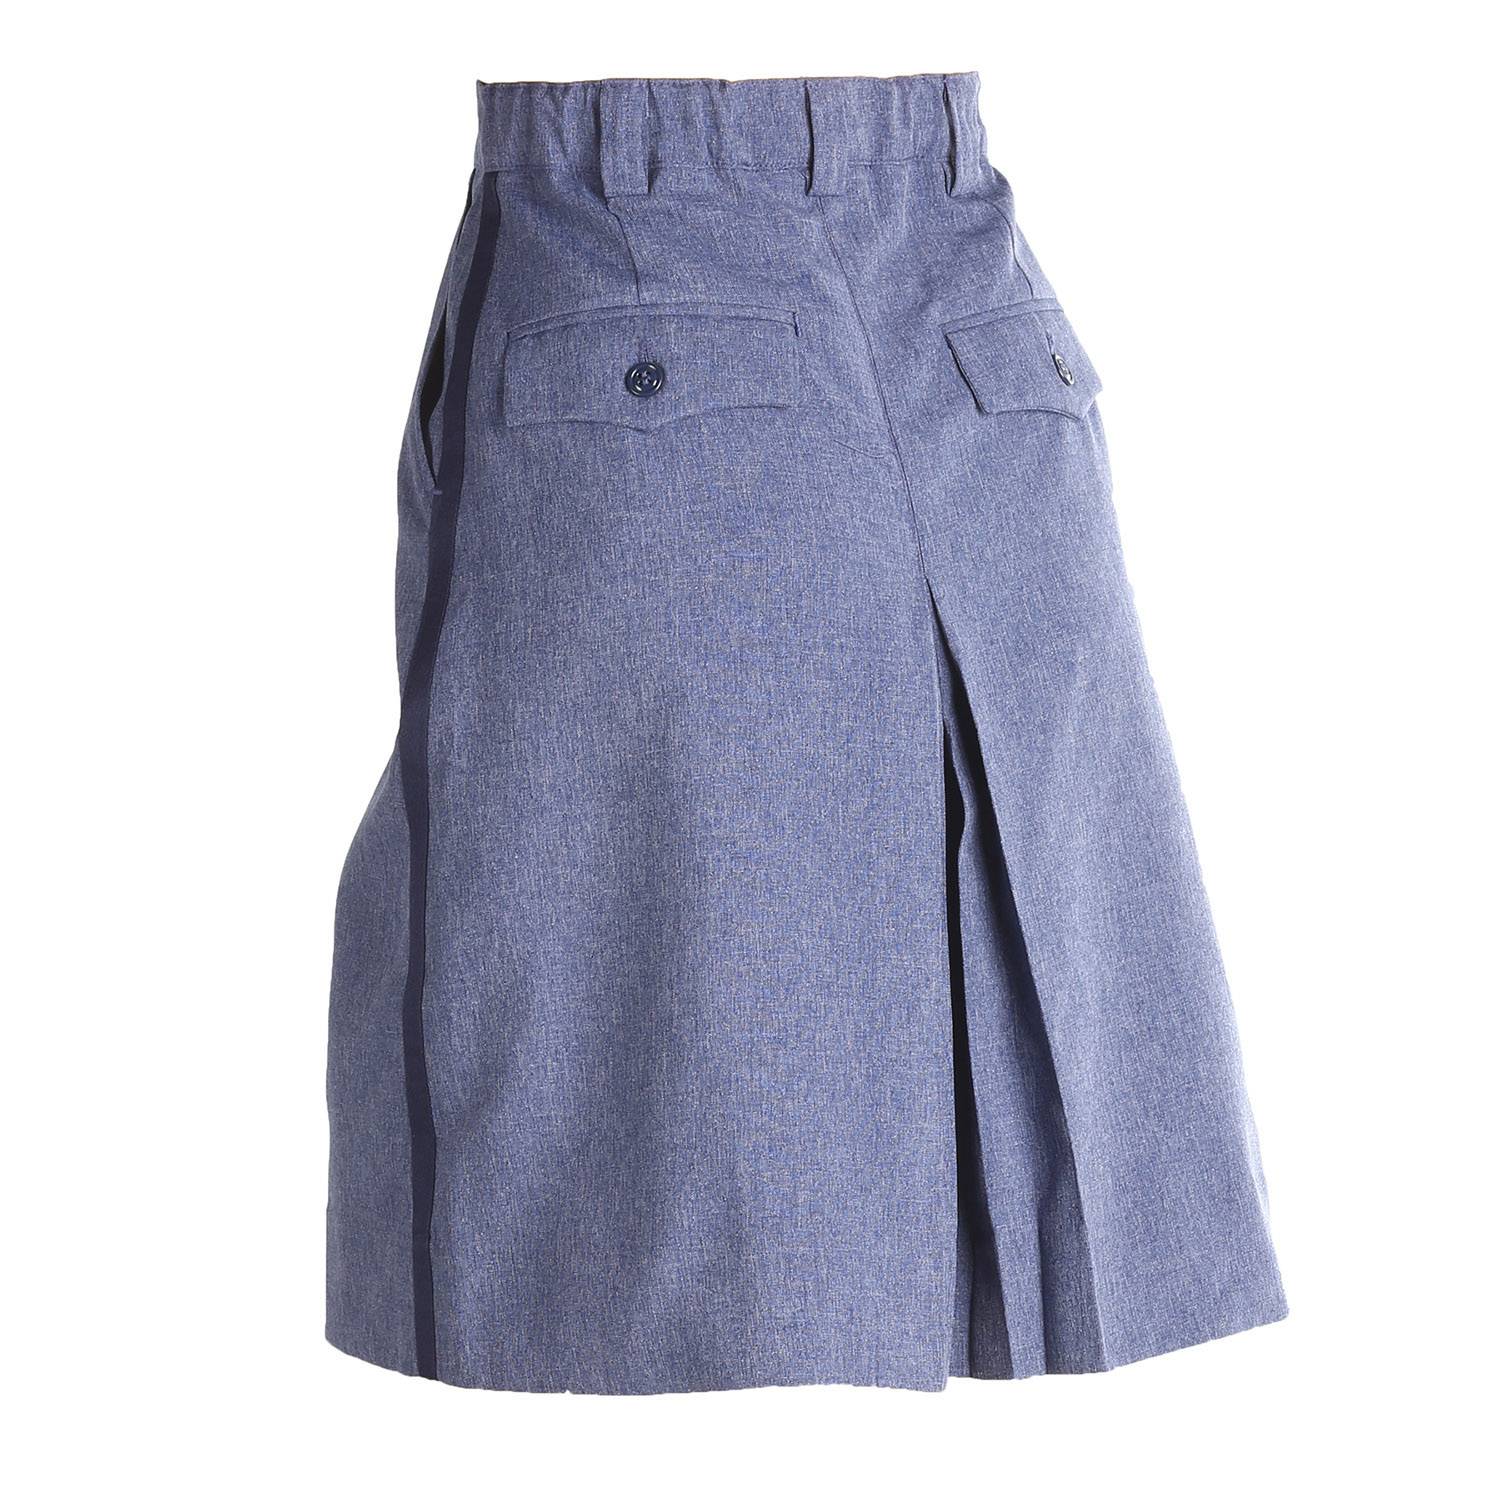 Womens Postal Uniform Culottes for Letter Carriers and Mo...